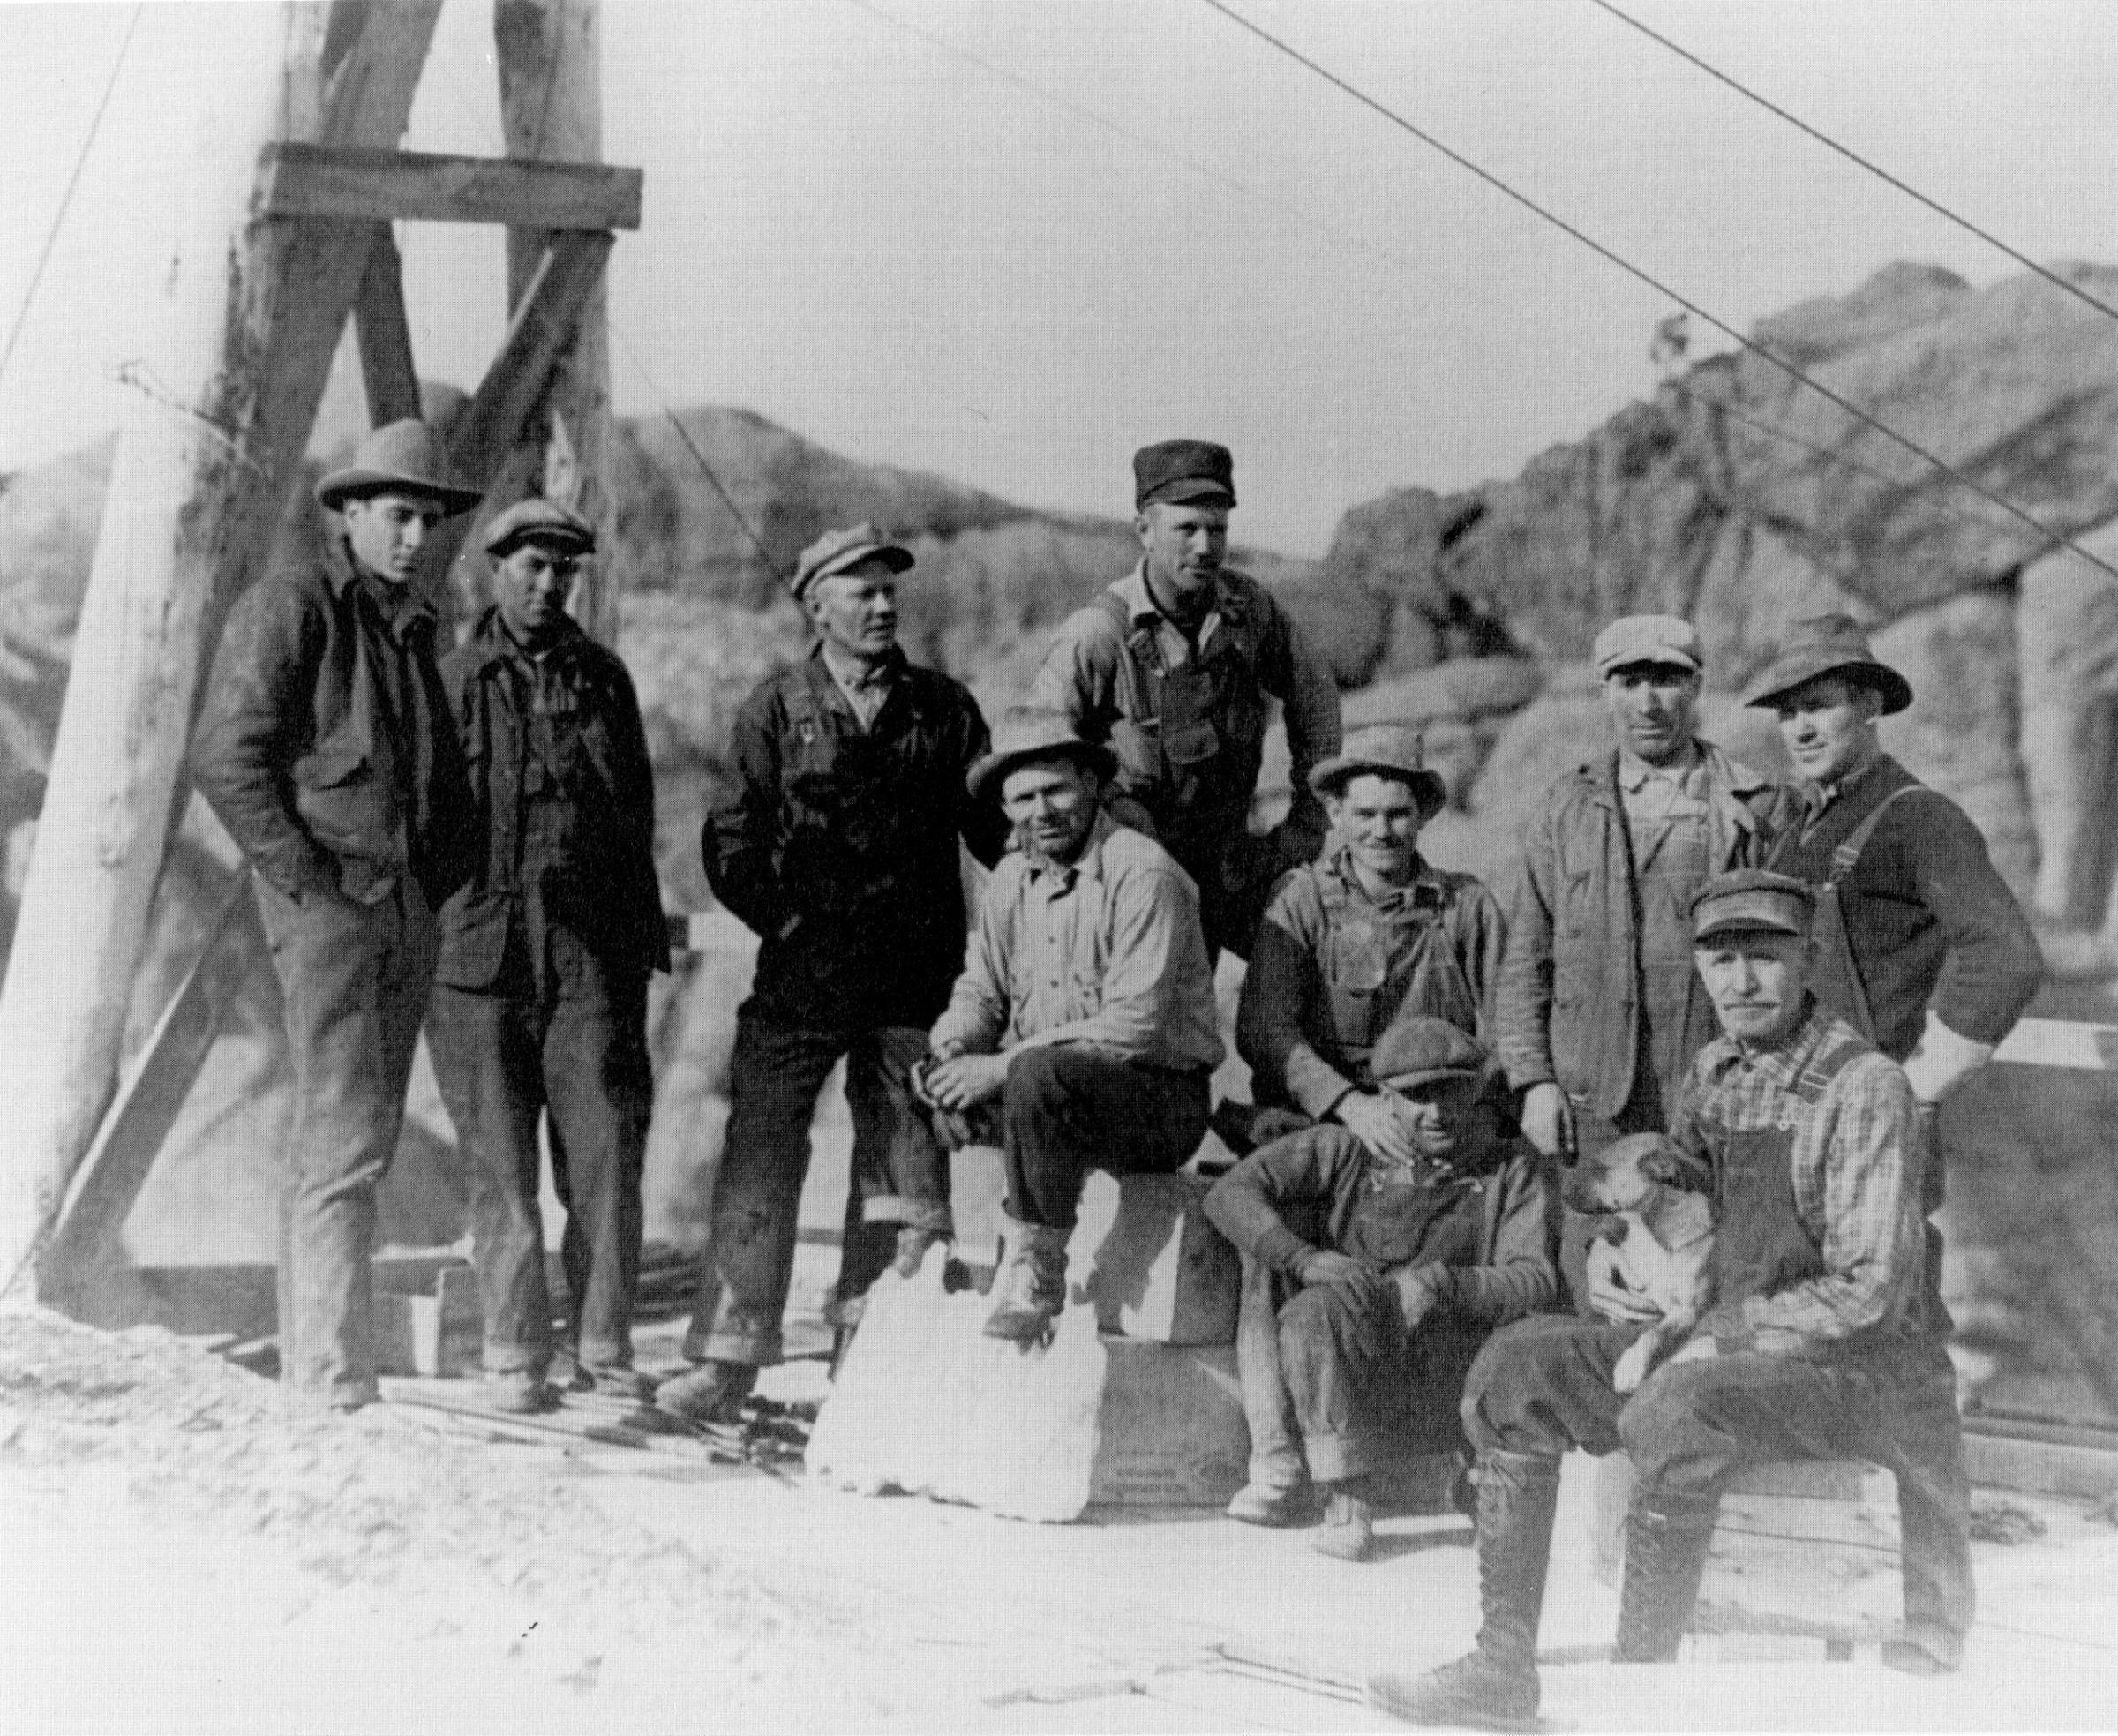 Workers take a break atop the mountain, c. 1930s.